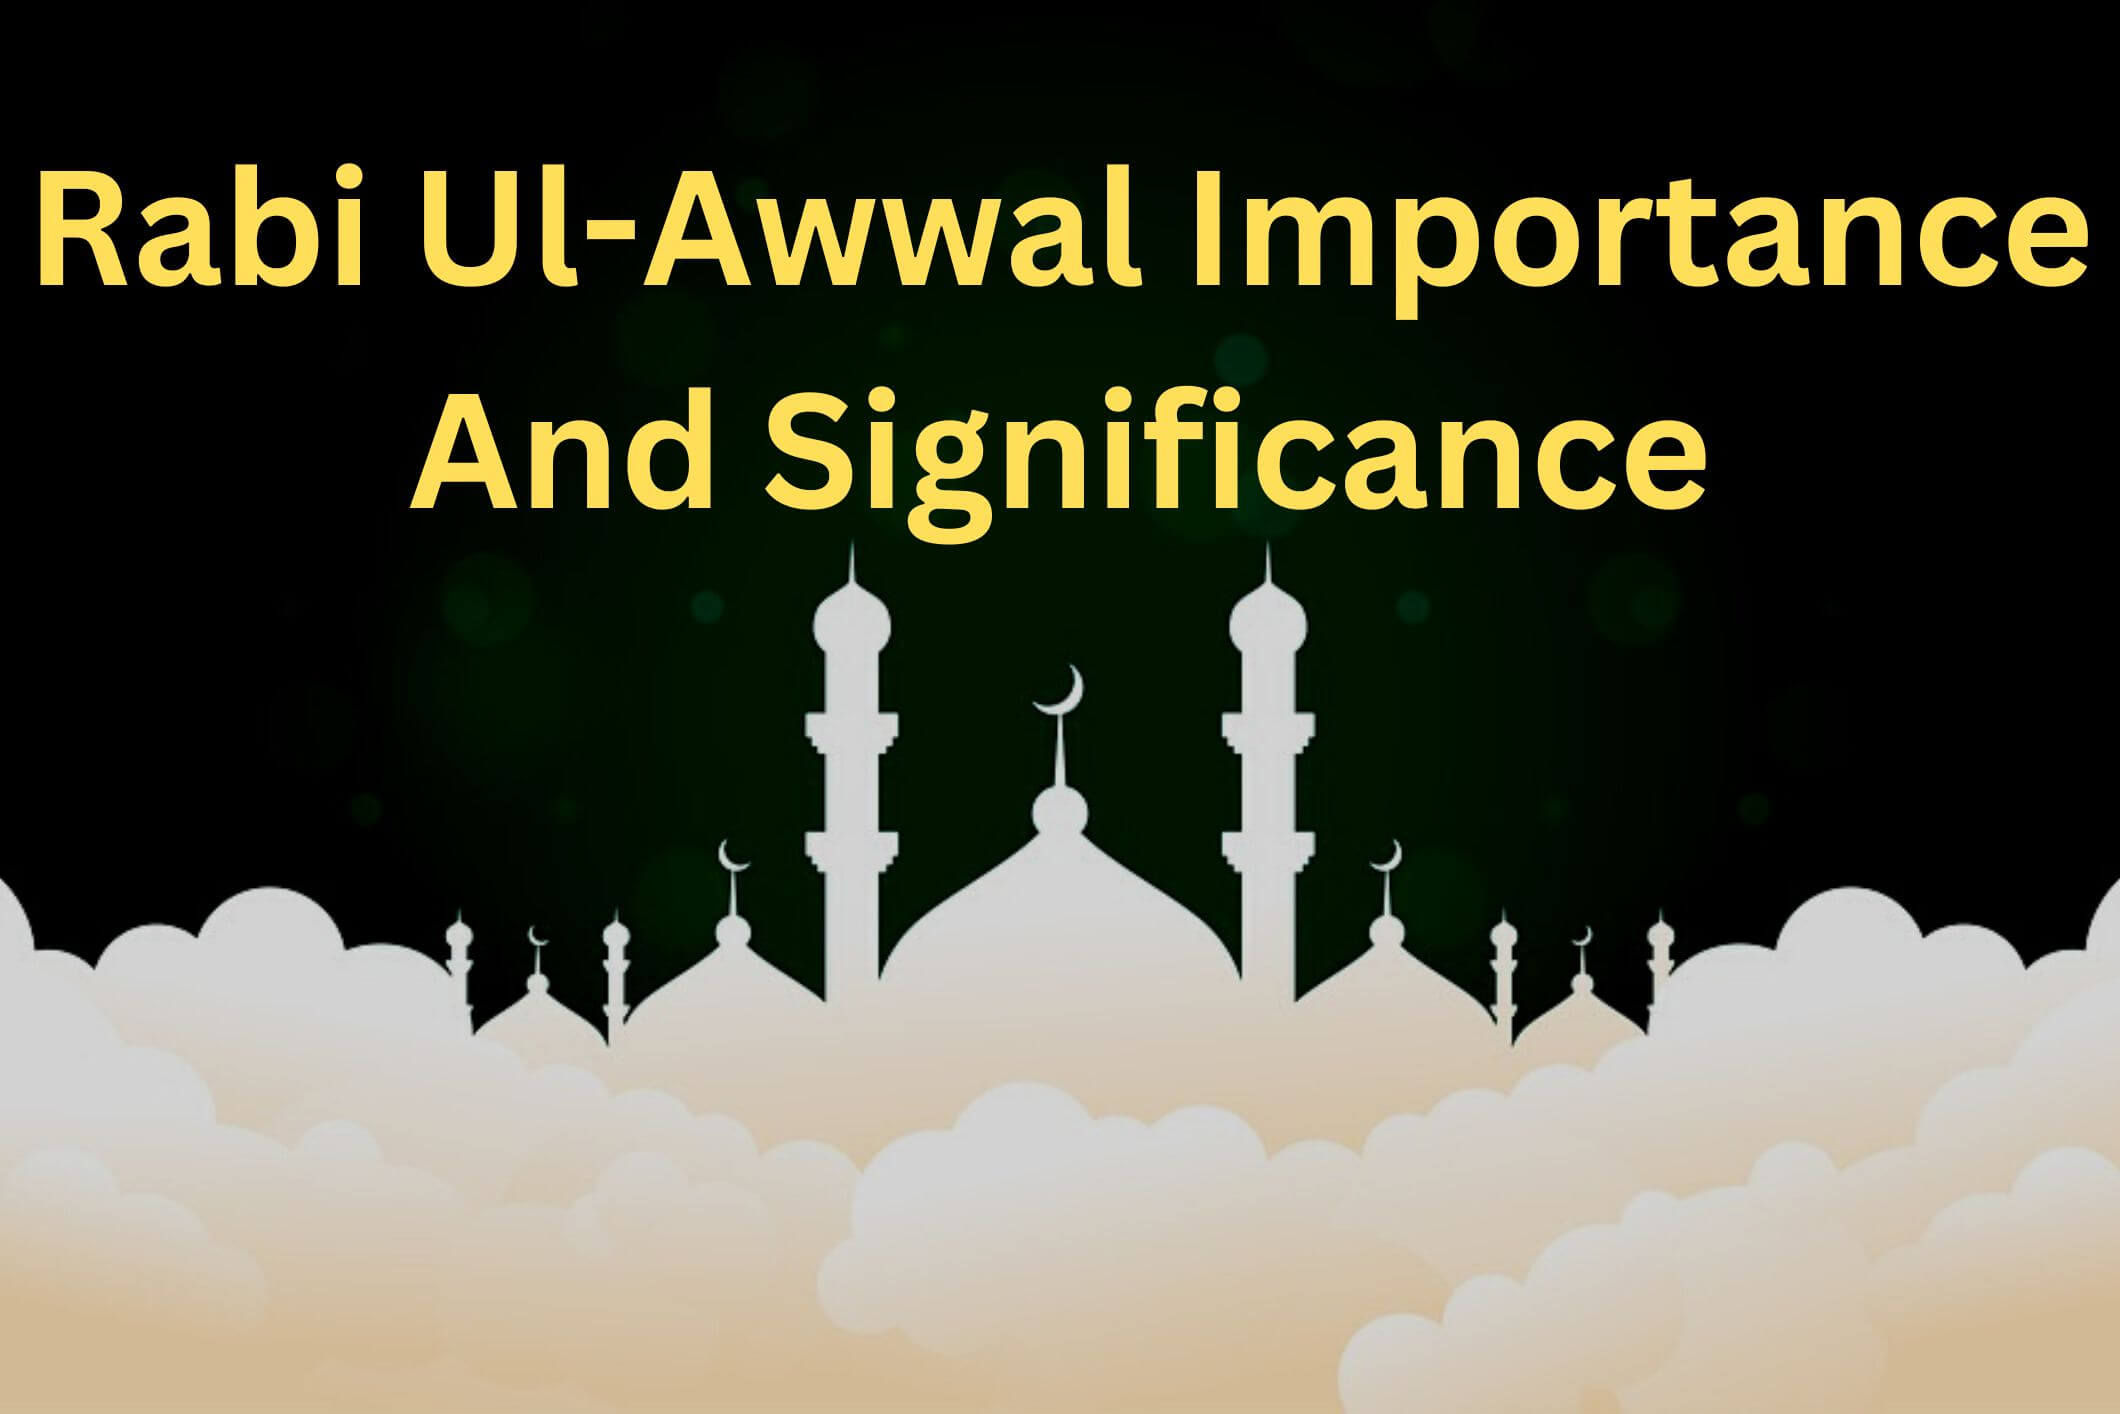 Rabi Ul-Awwal Importance And Significance